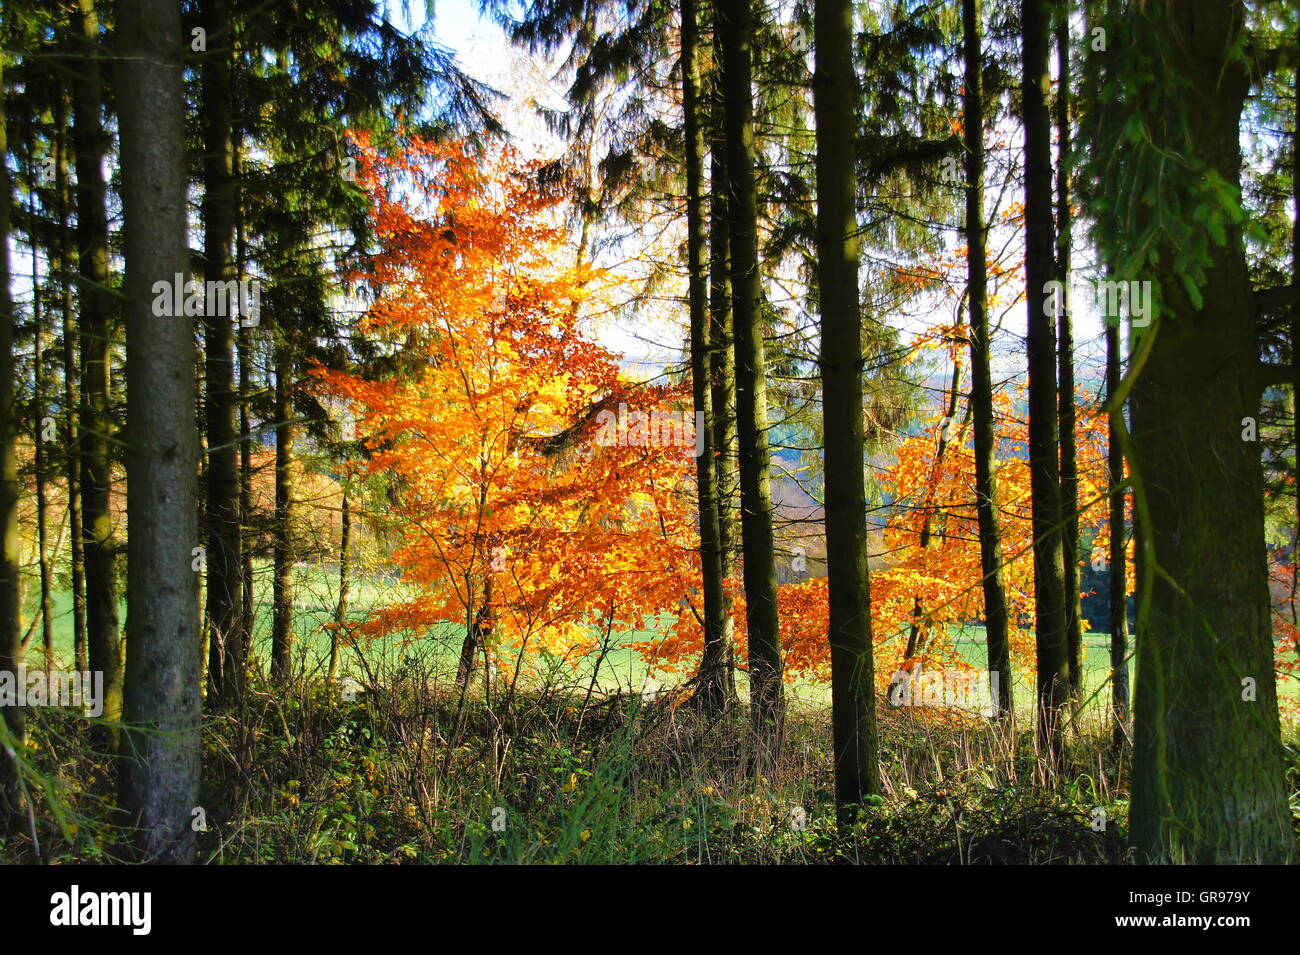 Golden Yellow Beeches On The Edge Of A Pine Forest Stock Photo